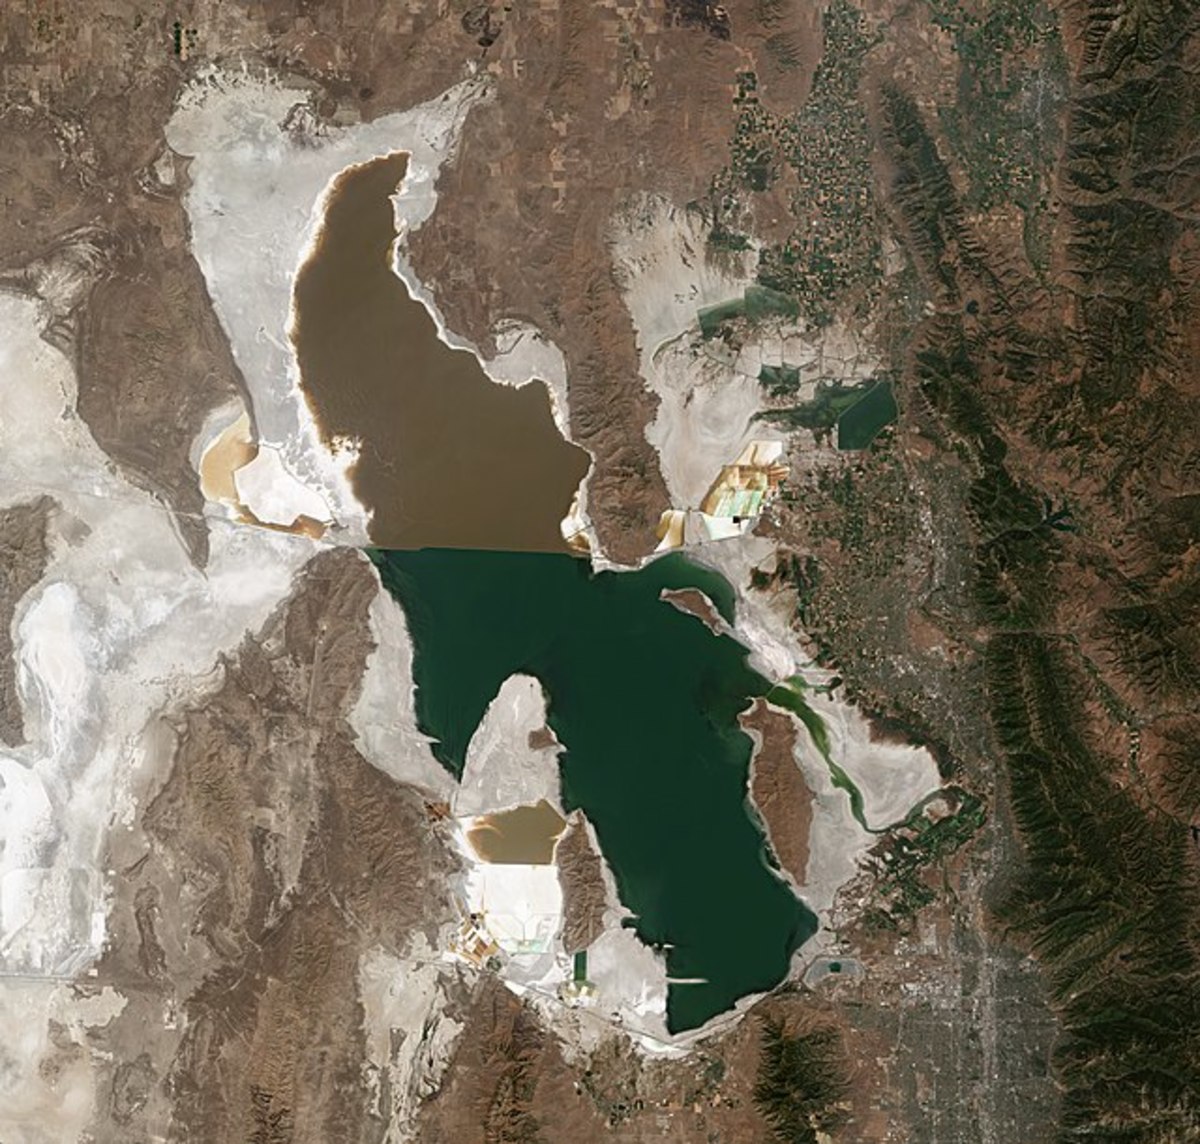 The Great Salt Lake of Utah is drying up, as is the Colorado River watershed, the result of too many people tapping it out. Is more abortion the answer - a definitive NO.